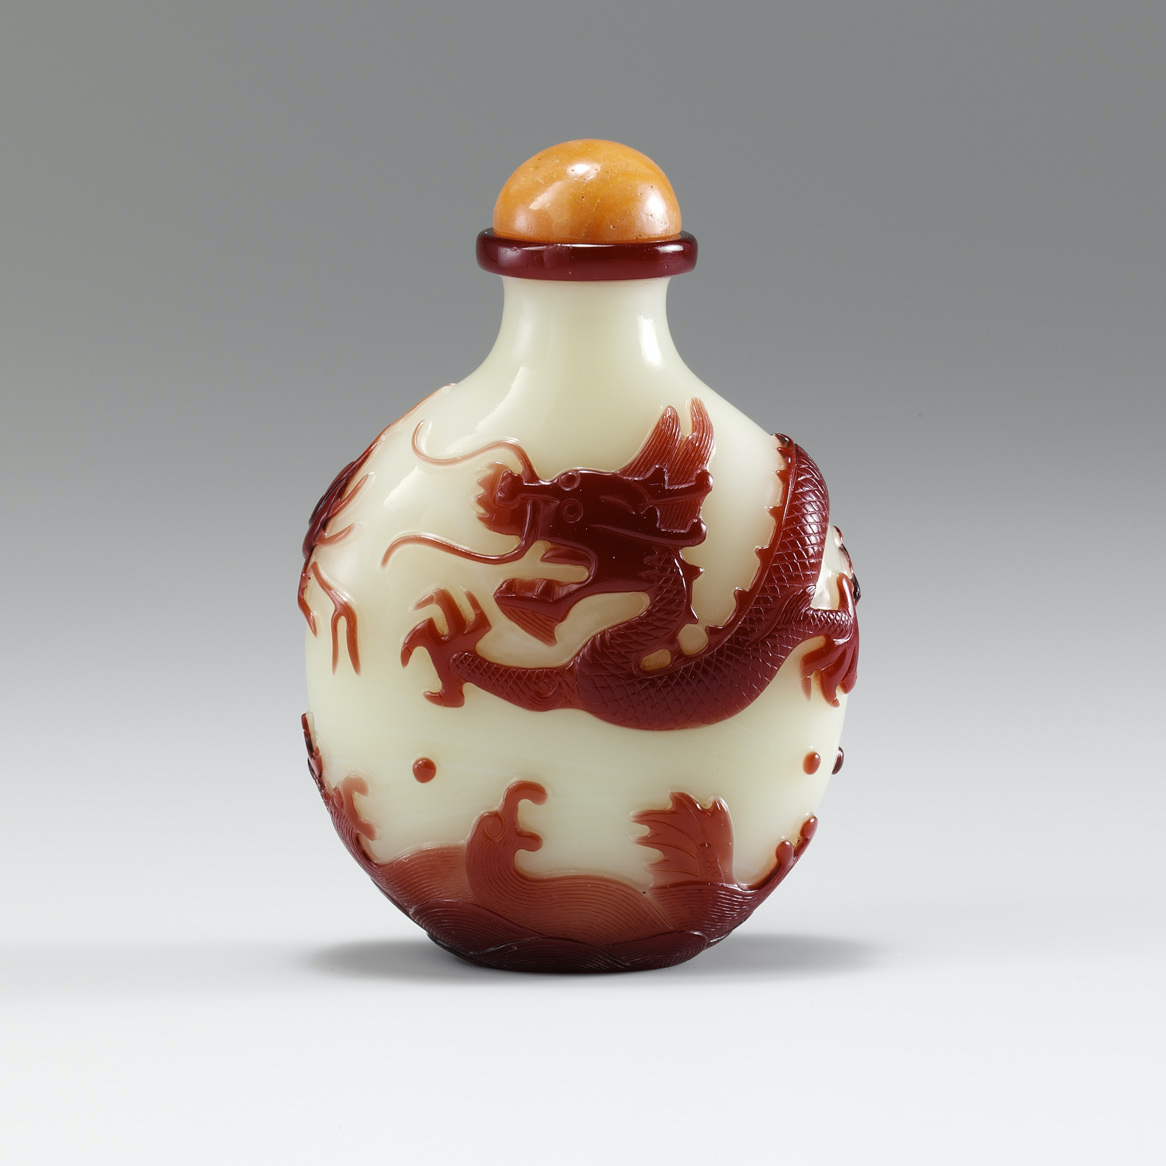 Pale yellow glass with red overlay of dragon, 1780-1840